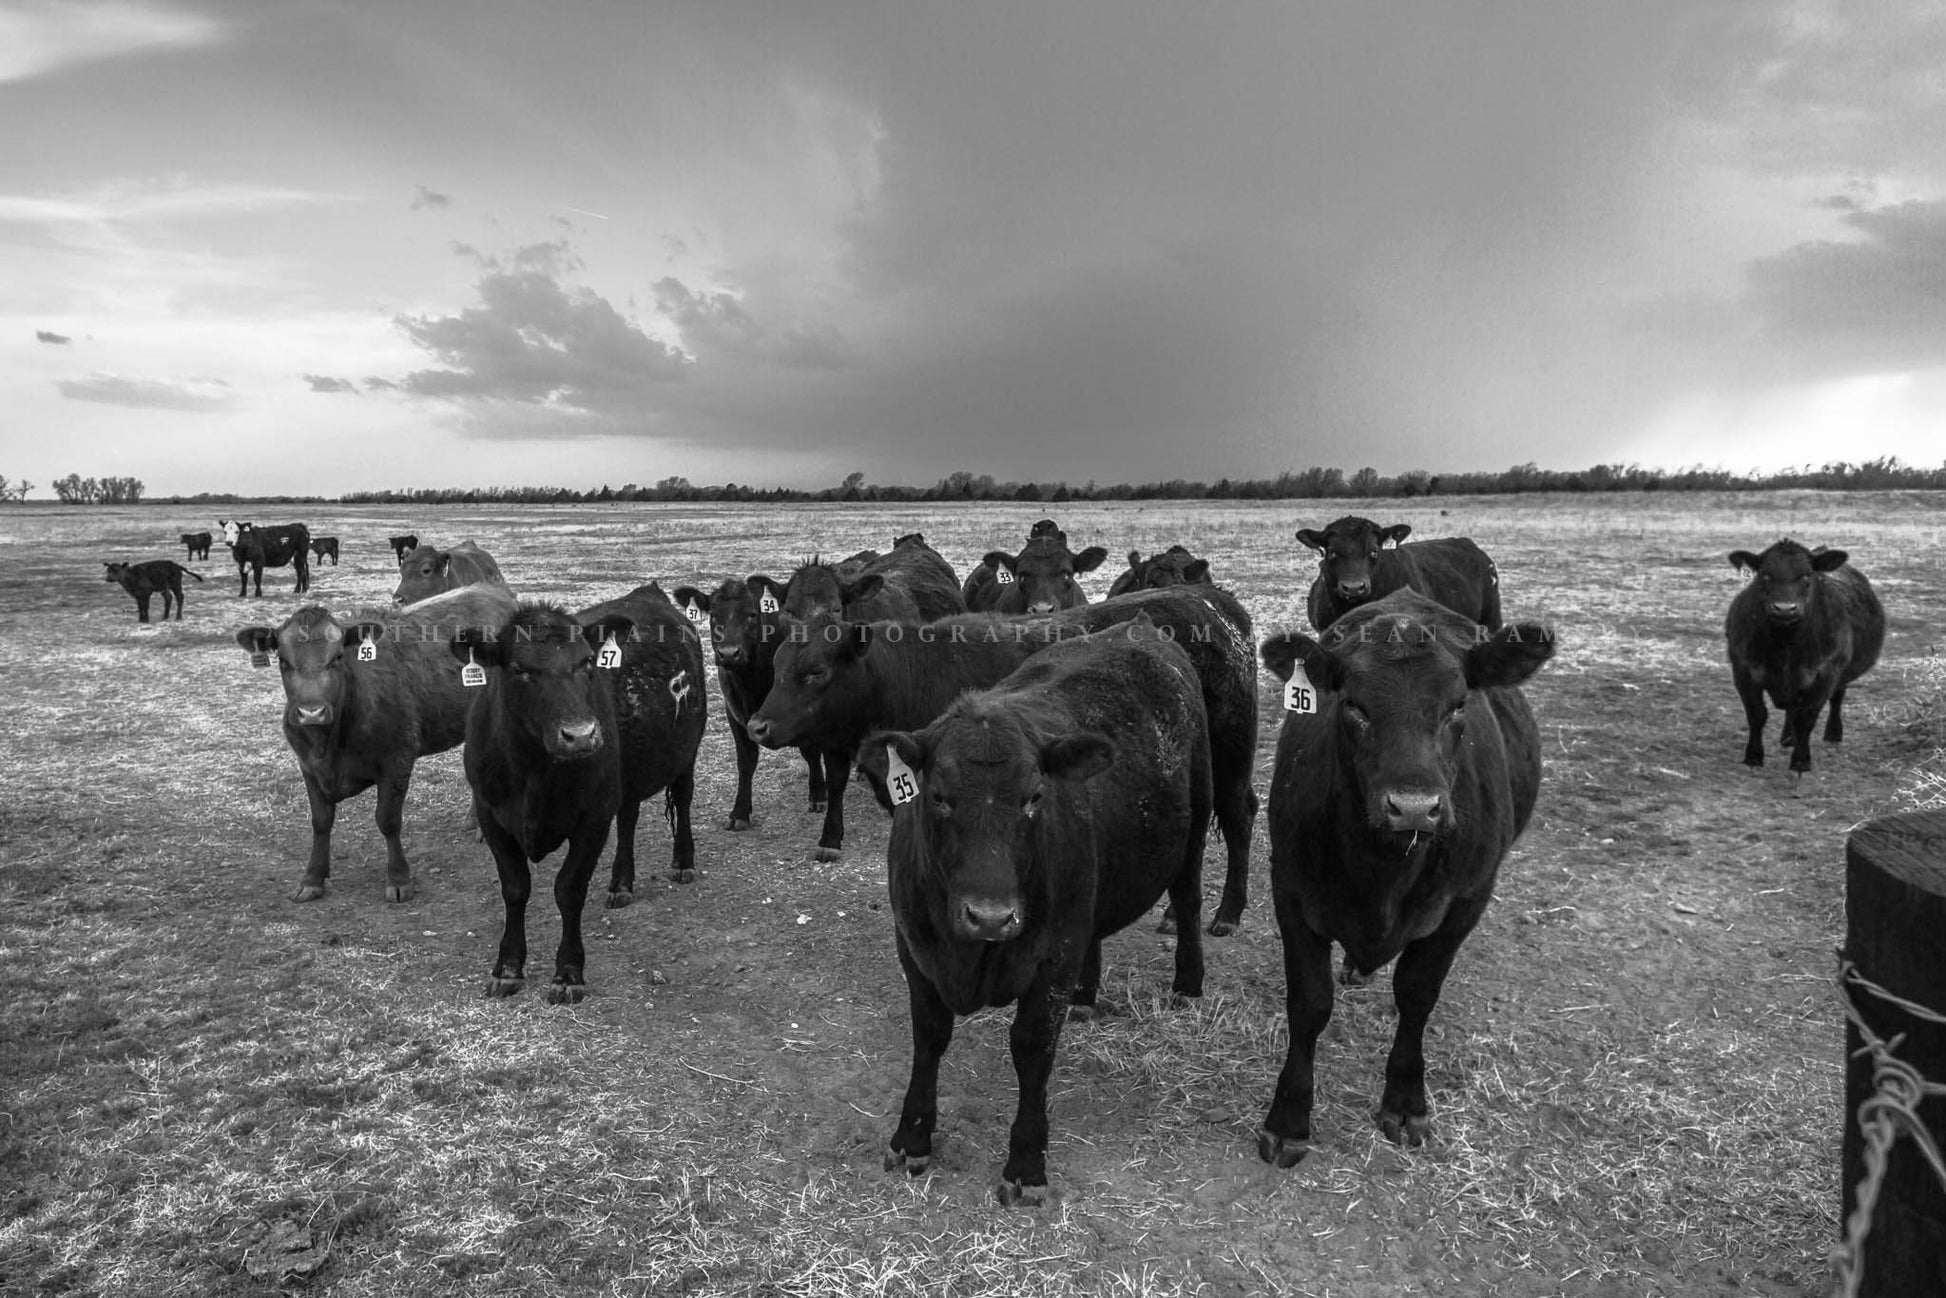 Black and white photography print of angus cows gathering as a storm brews on the horizon on a stormy spring day in Kansas by Sean Ramsey of Southern Plains Photography.